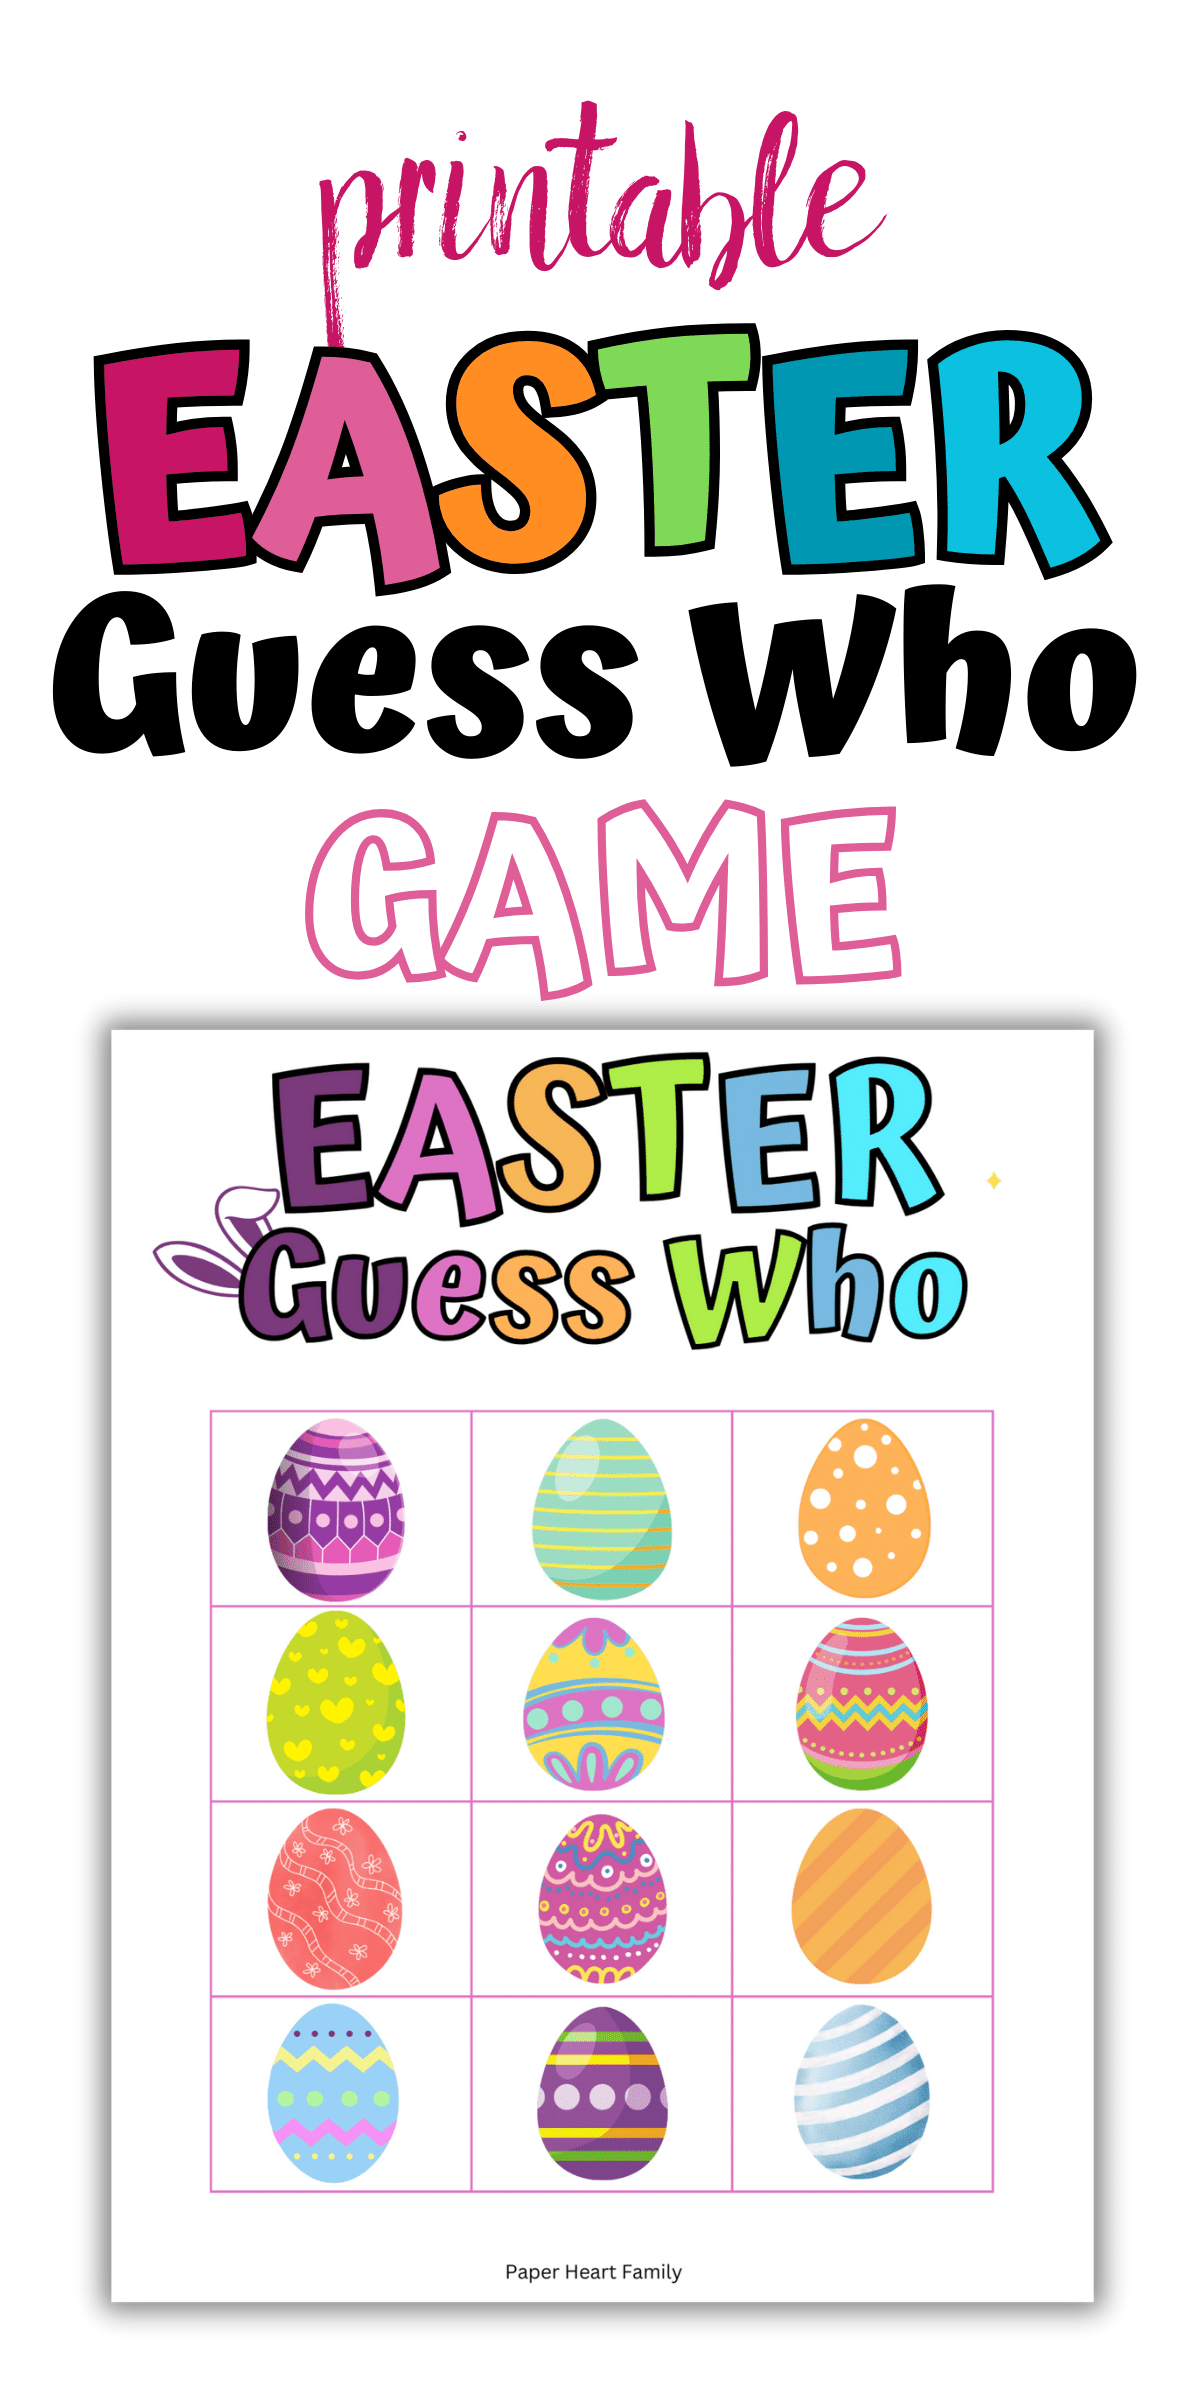 Guess Who game featuring Easter eggs with different colors and patterns